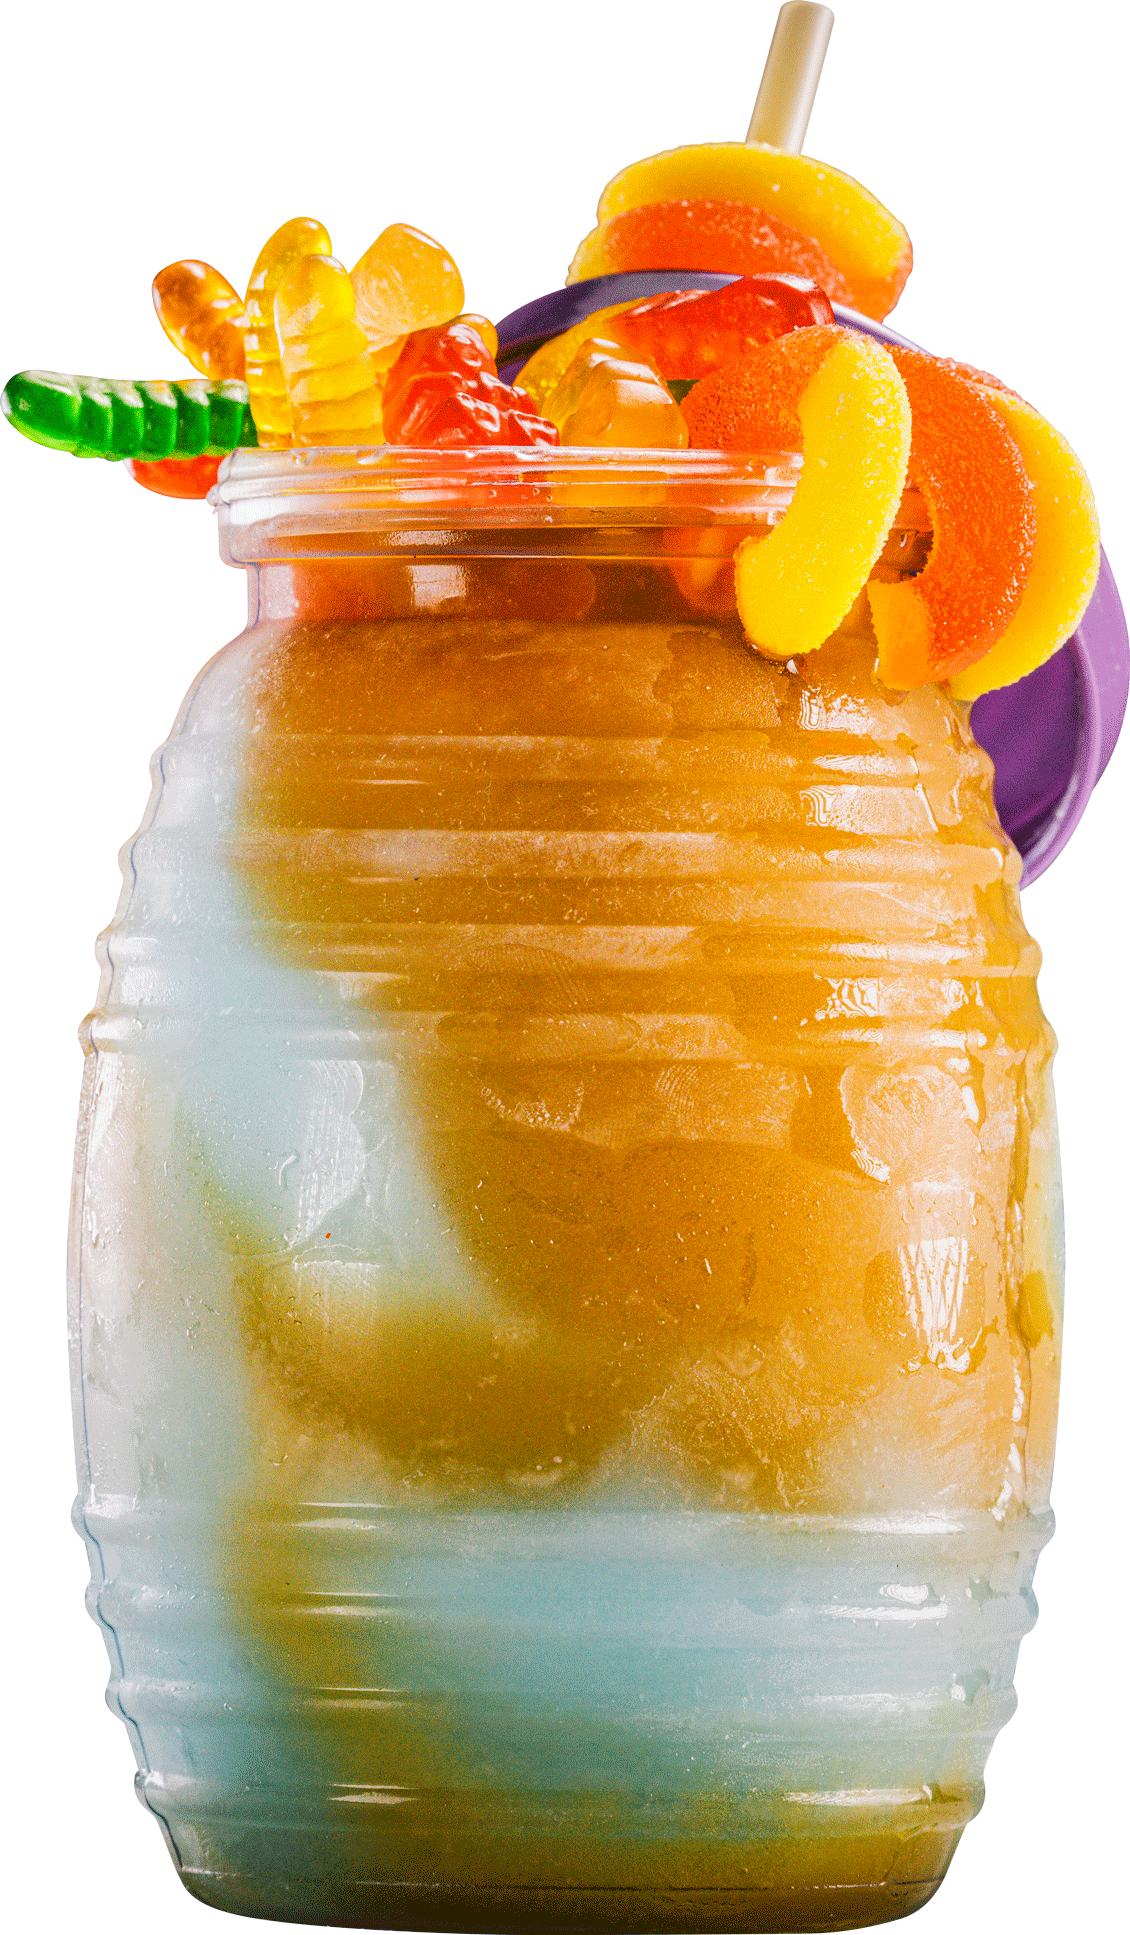 A mason jar filled with ice cream and gummy bears.